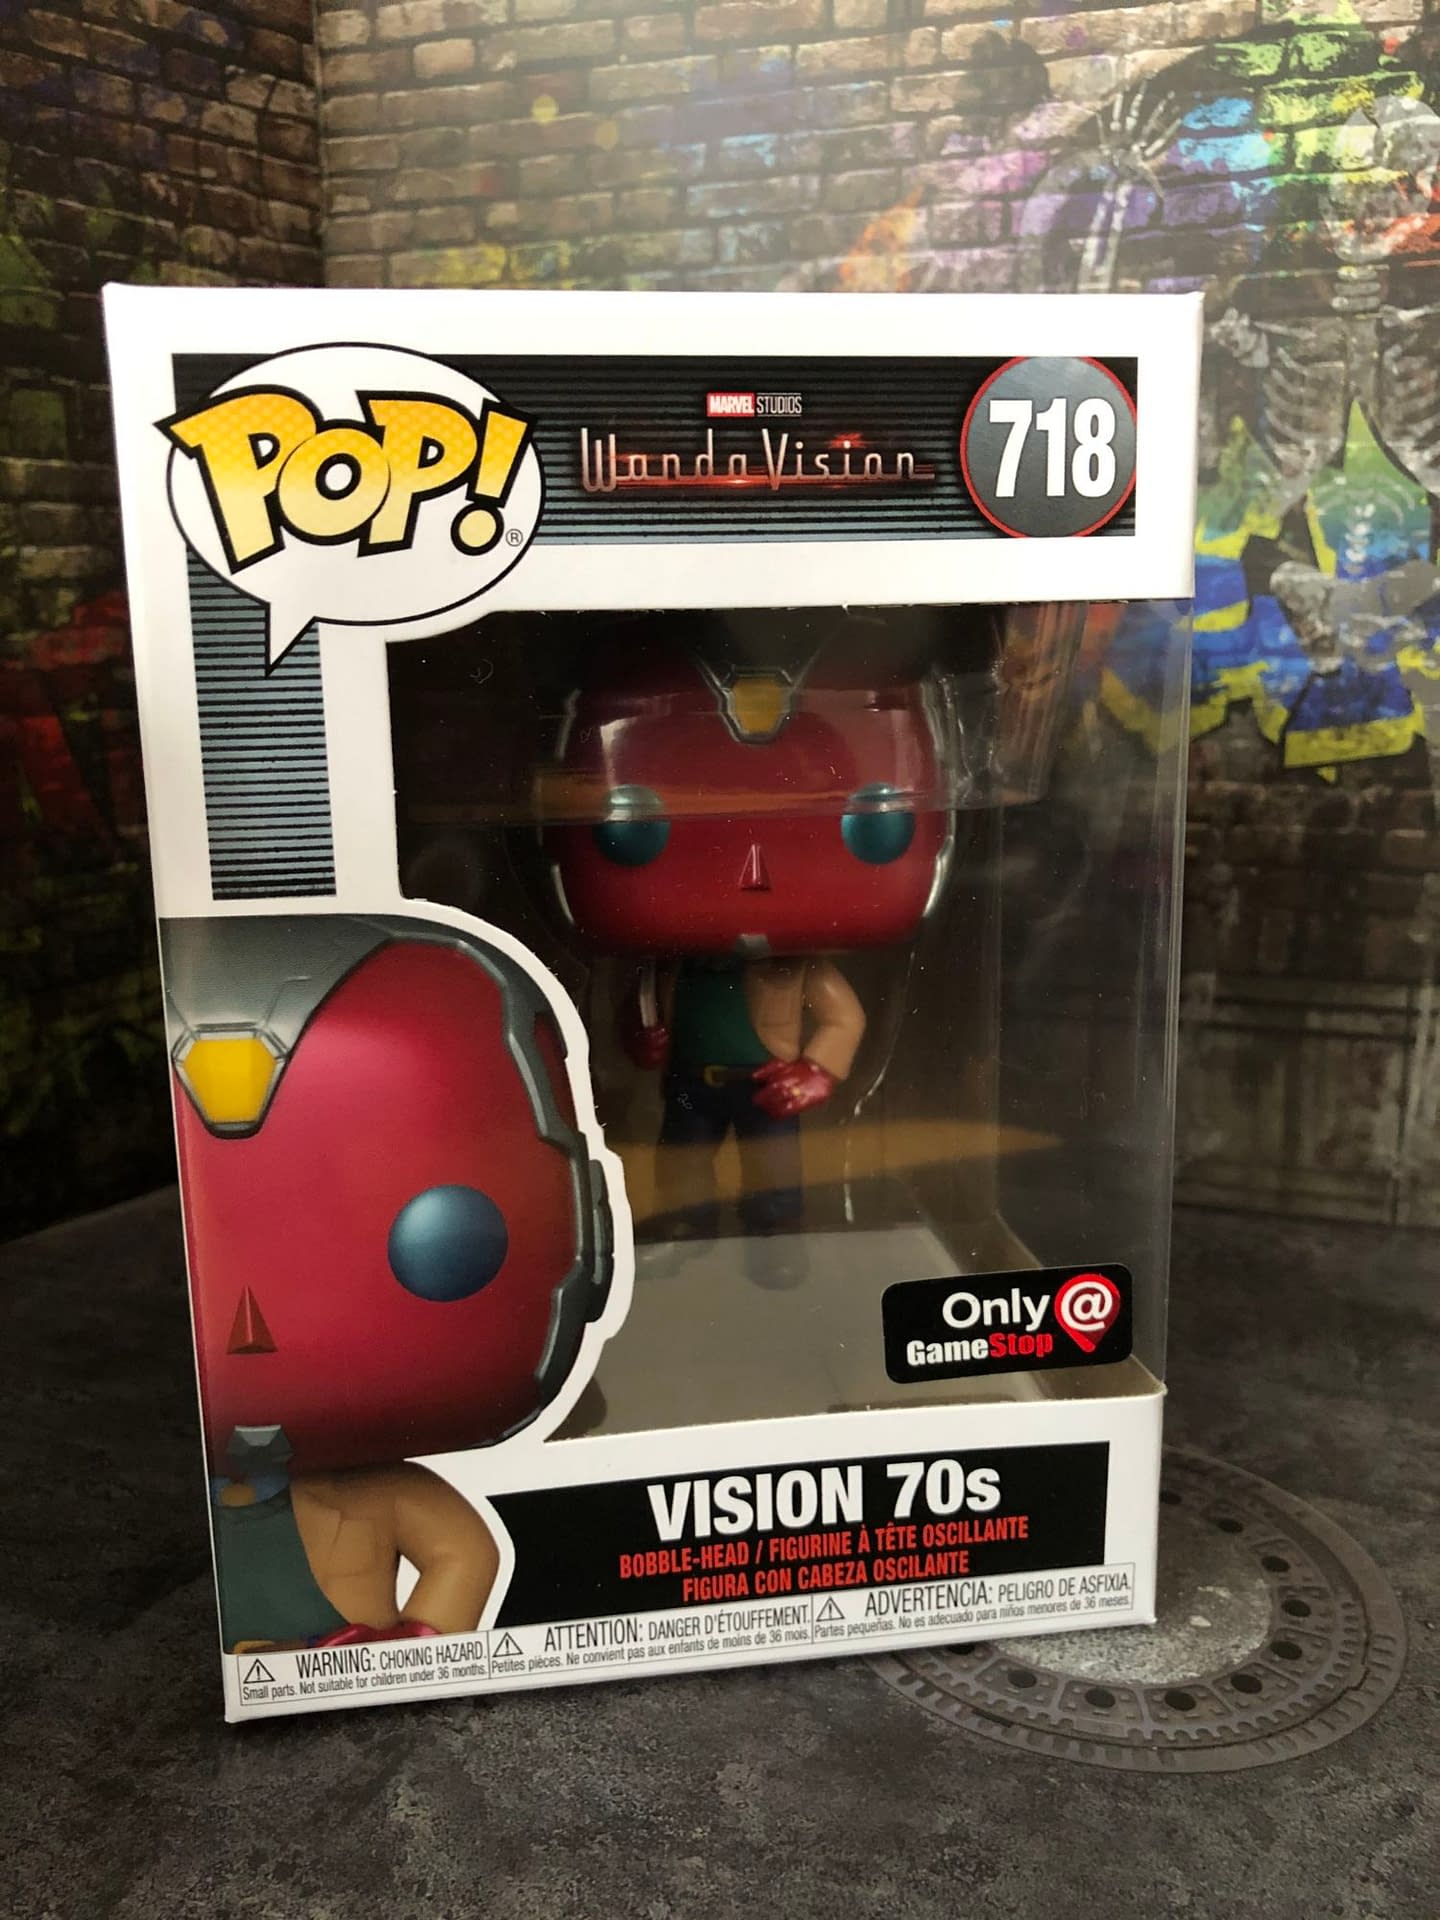 Take a Look at the Entire Wave of WandaVision Pops From Funko